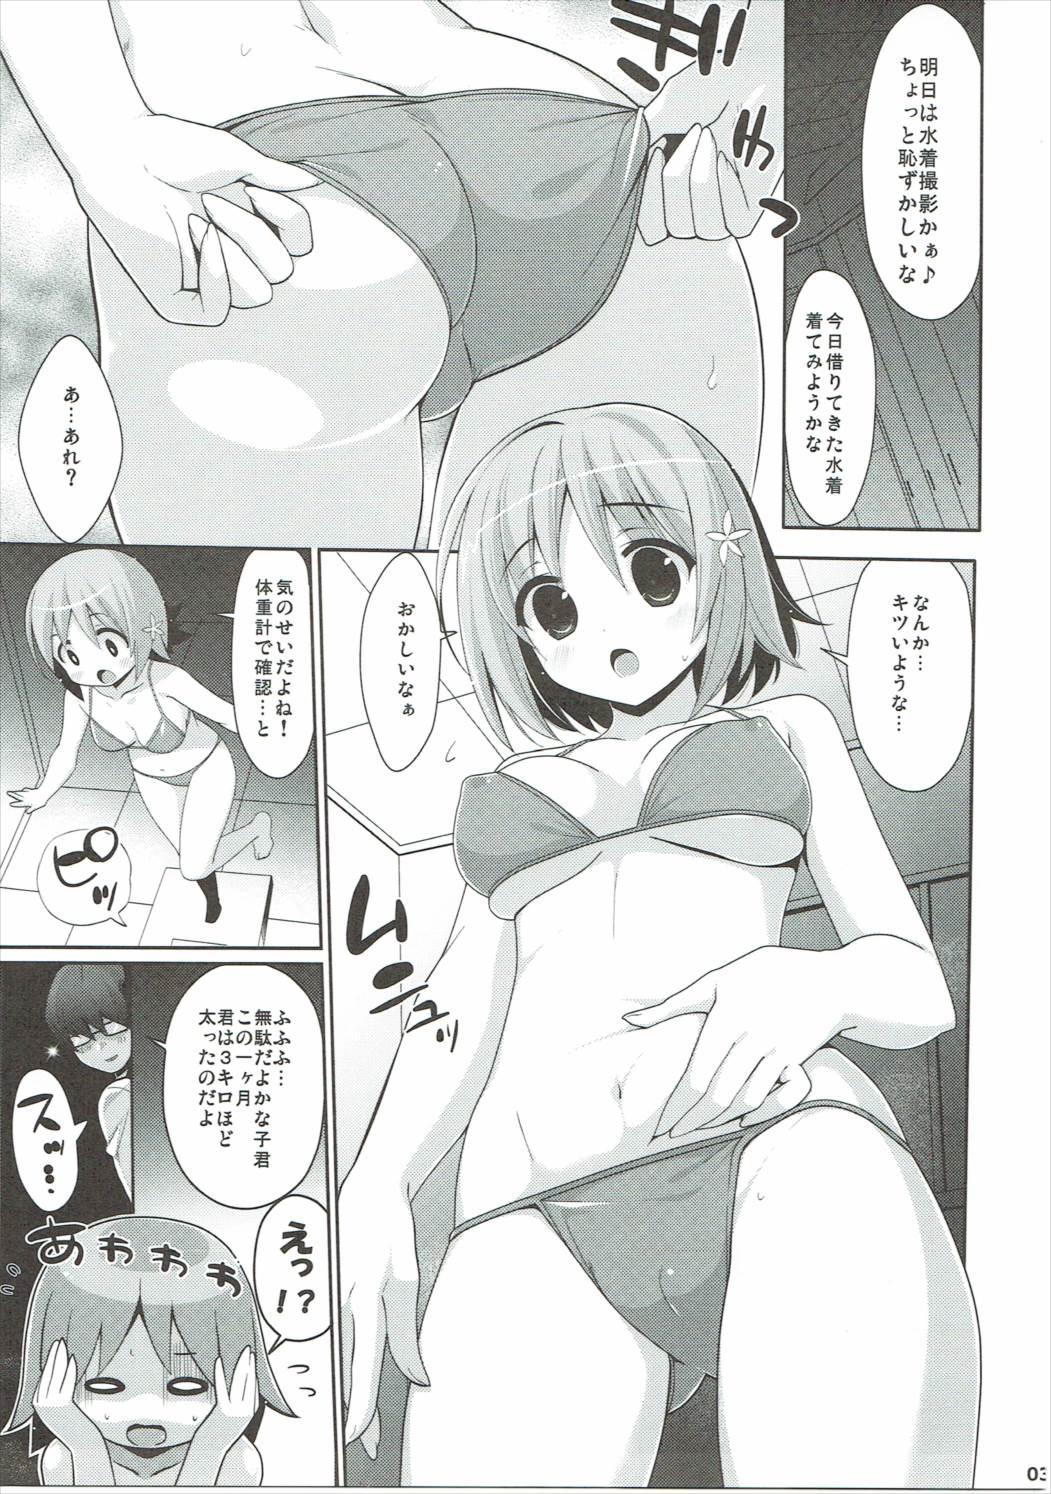 Best Blowjobs 15-ji no Cinderella - The idolmaster Butthole - Page 2